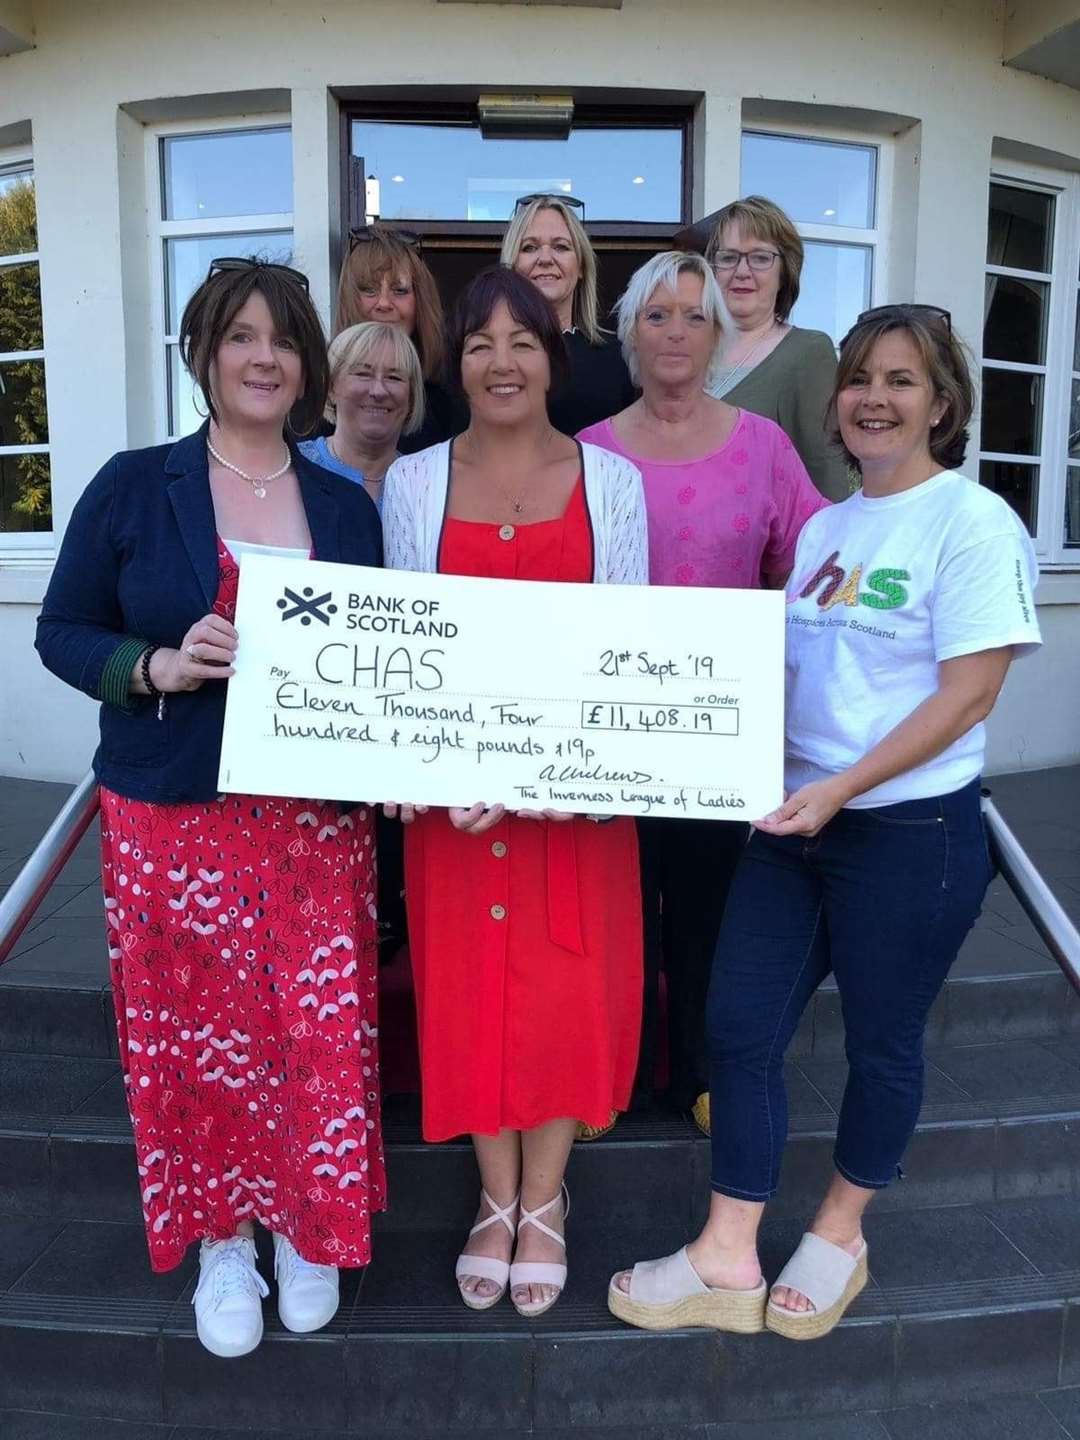 Members of Inverness's League of Ladies have raised £11,400 for hospice charity CHAS.